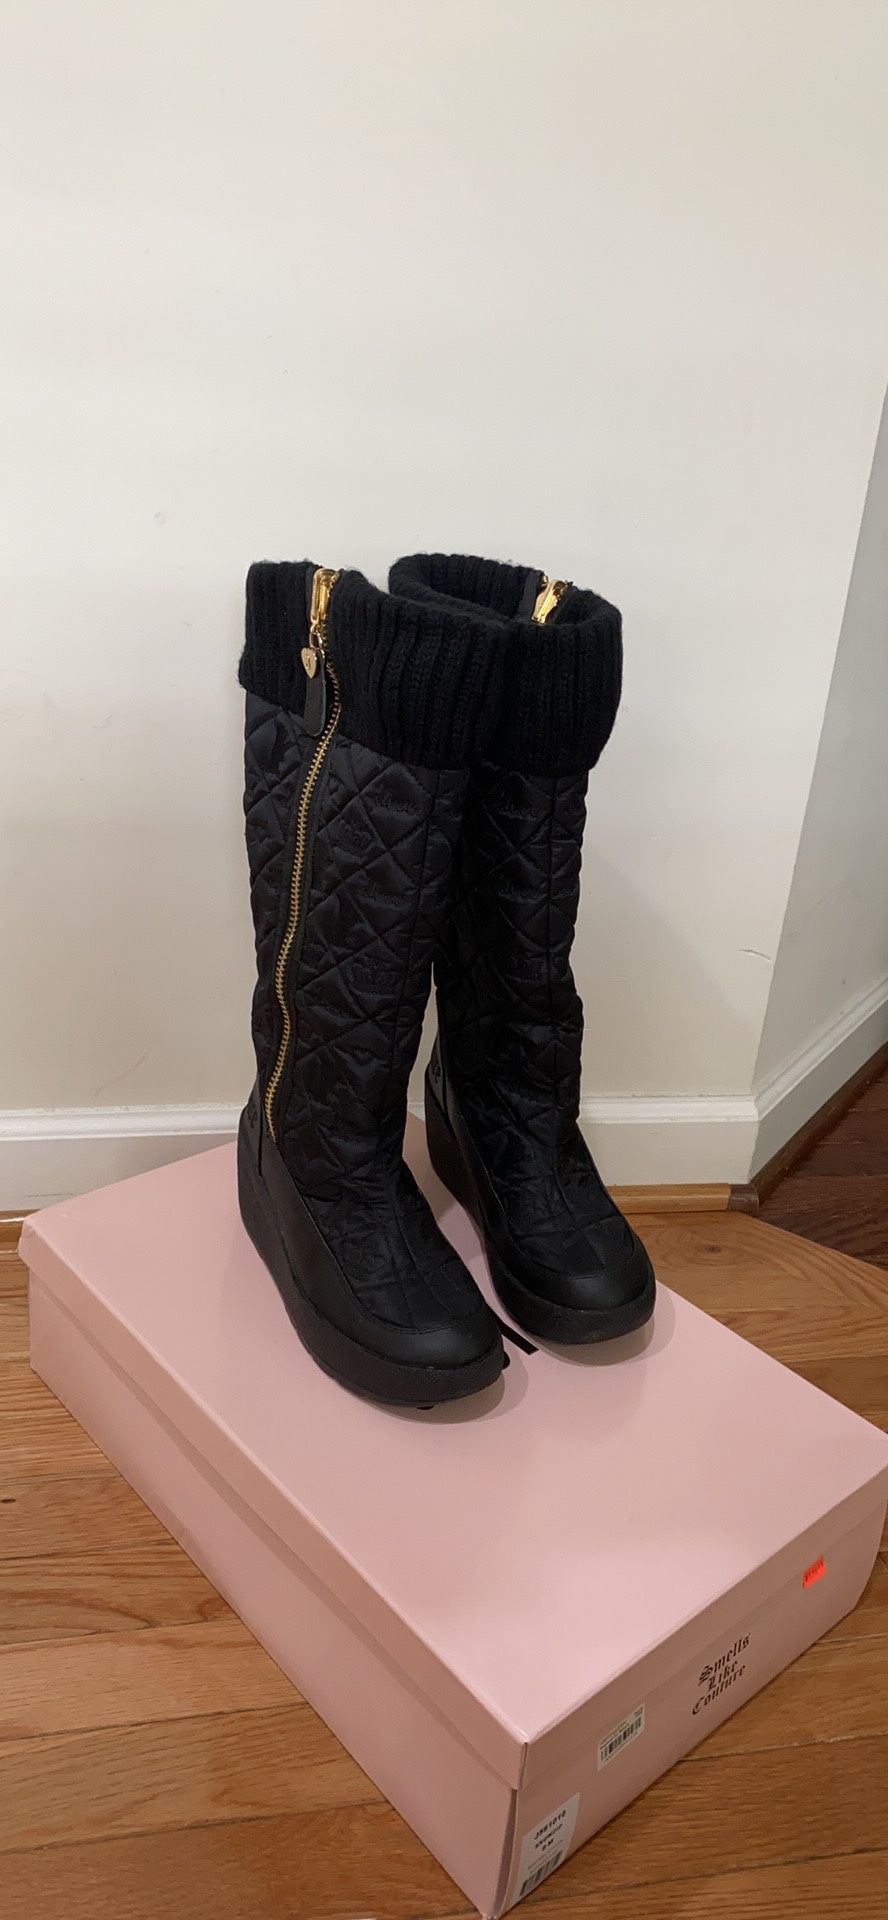 Juicy couture boots